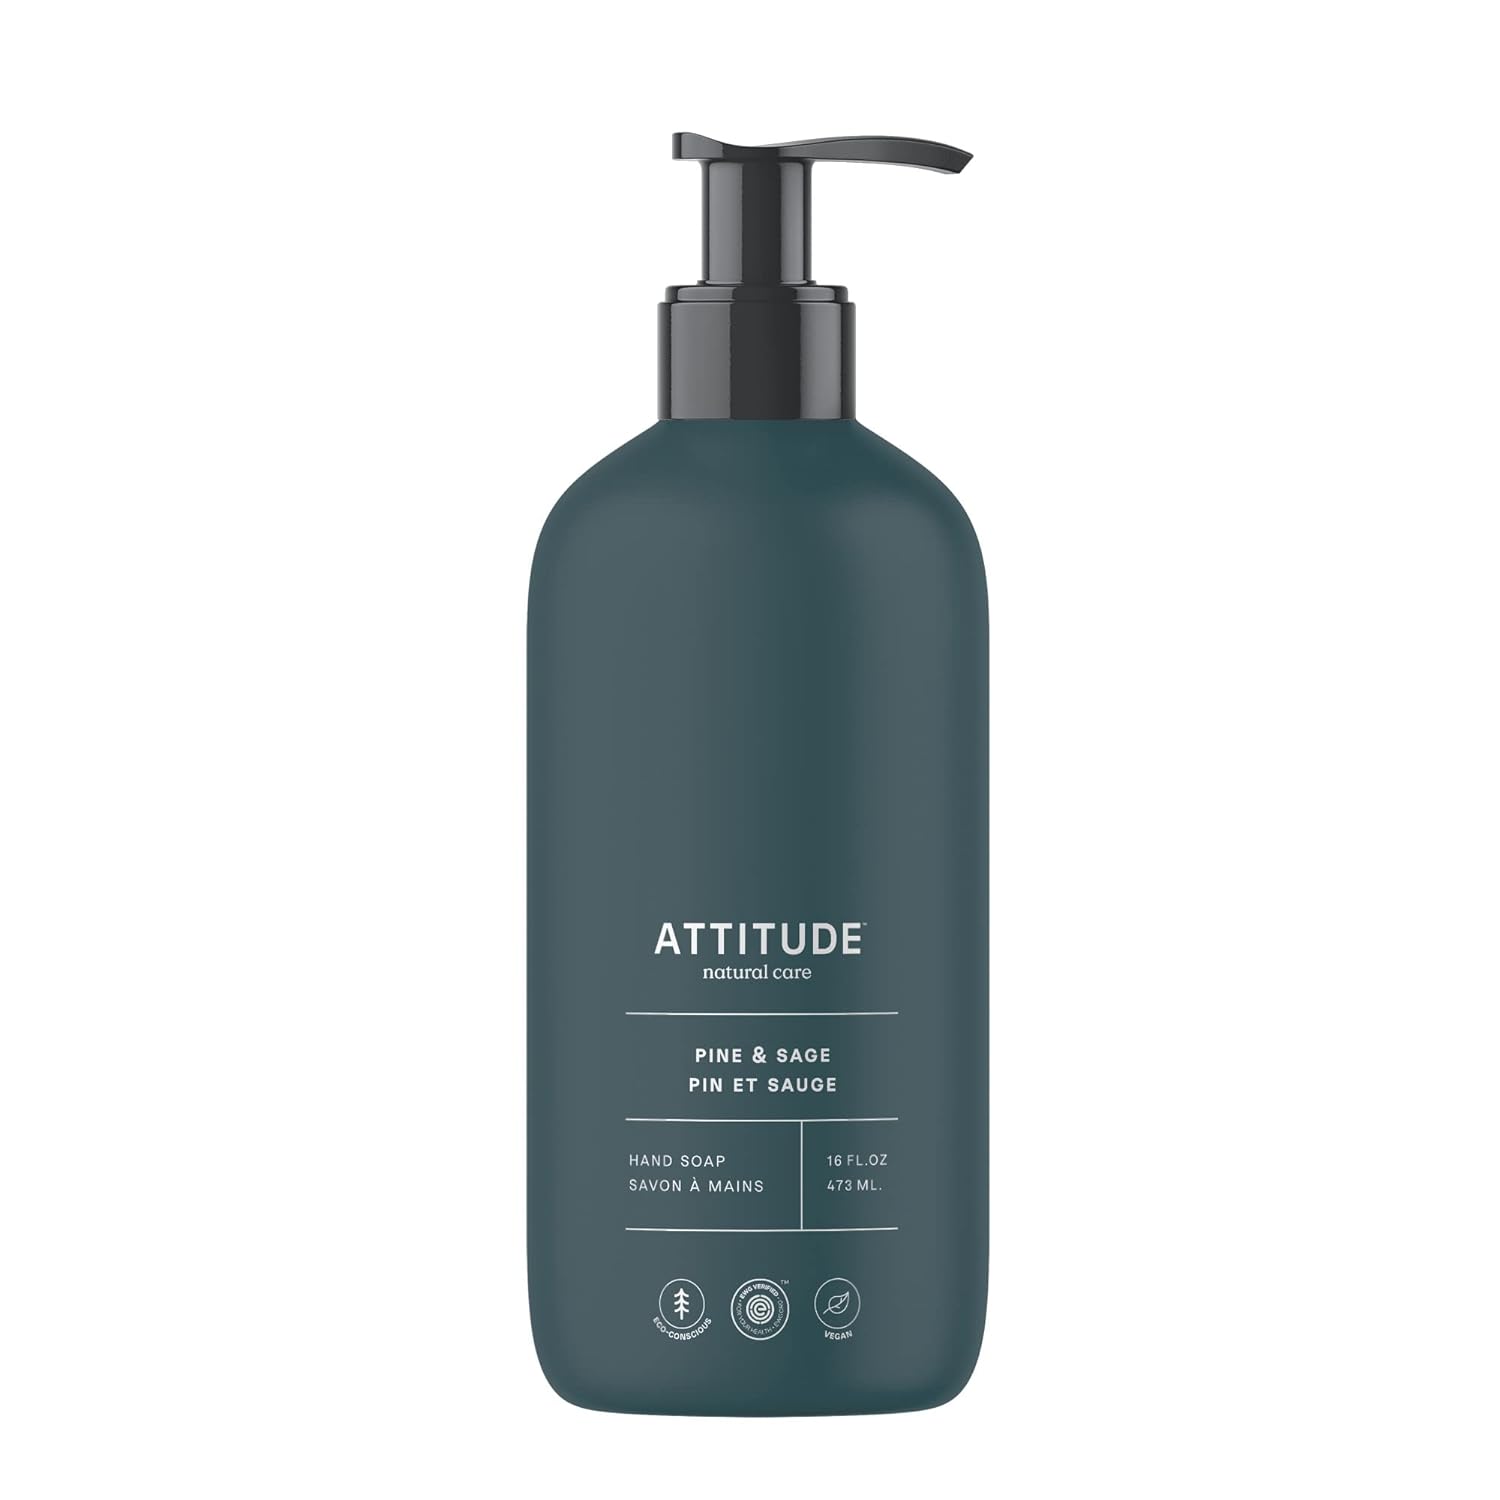 ATTITUDE Liquid Hand Soap, EWG Verified, Plant and Mineral-Based, Vegan Personal Care Products, Pine & Sage, 16 Fl Oz